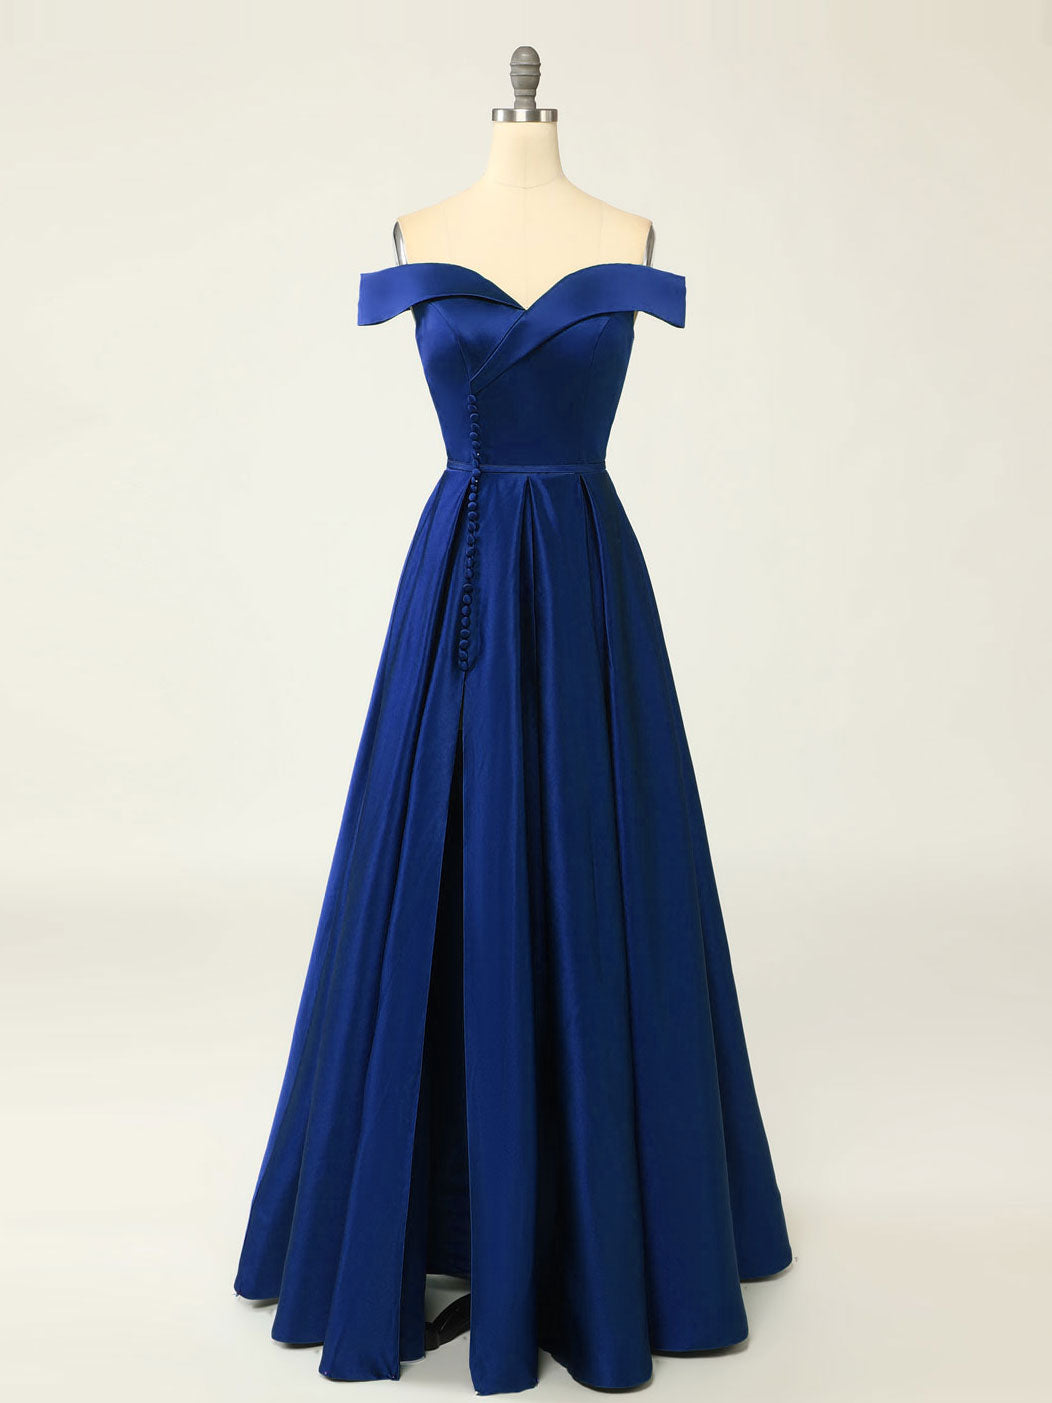 Overlap Neck Satin Royal Blue A-line Long Prom Dress Formal Party Dress - DollyGown